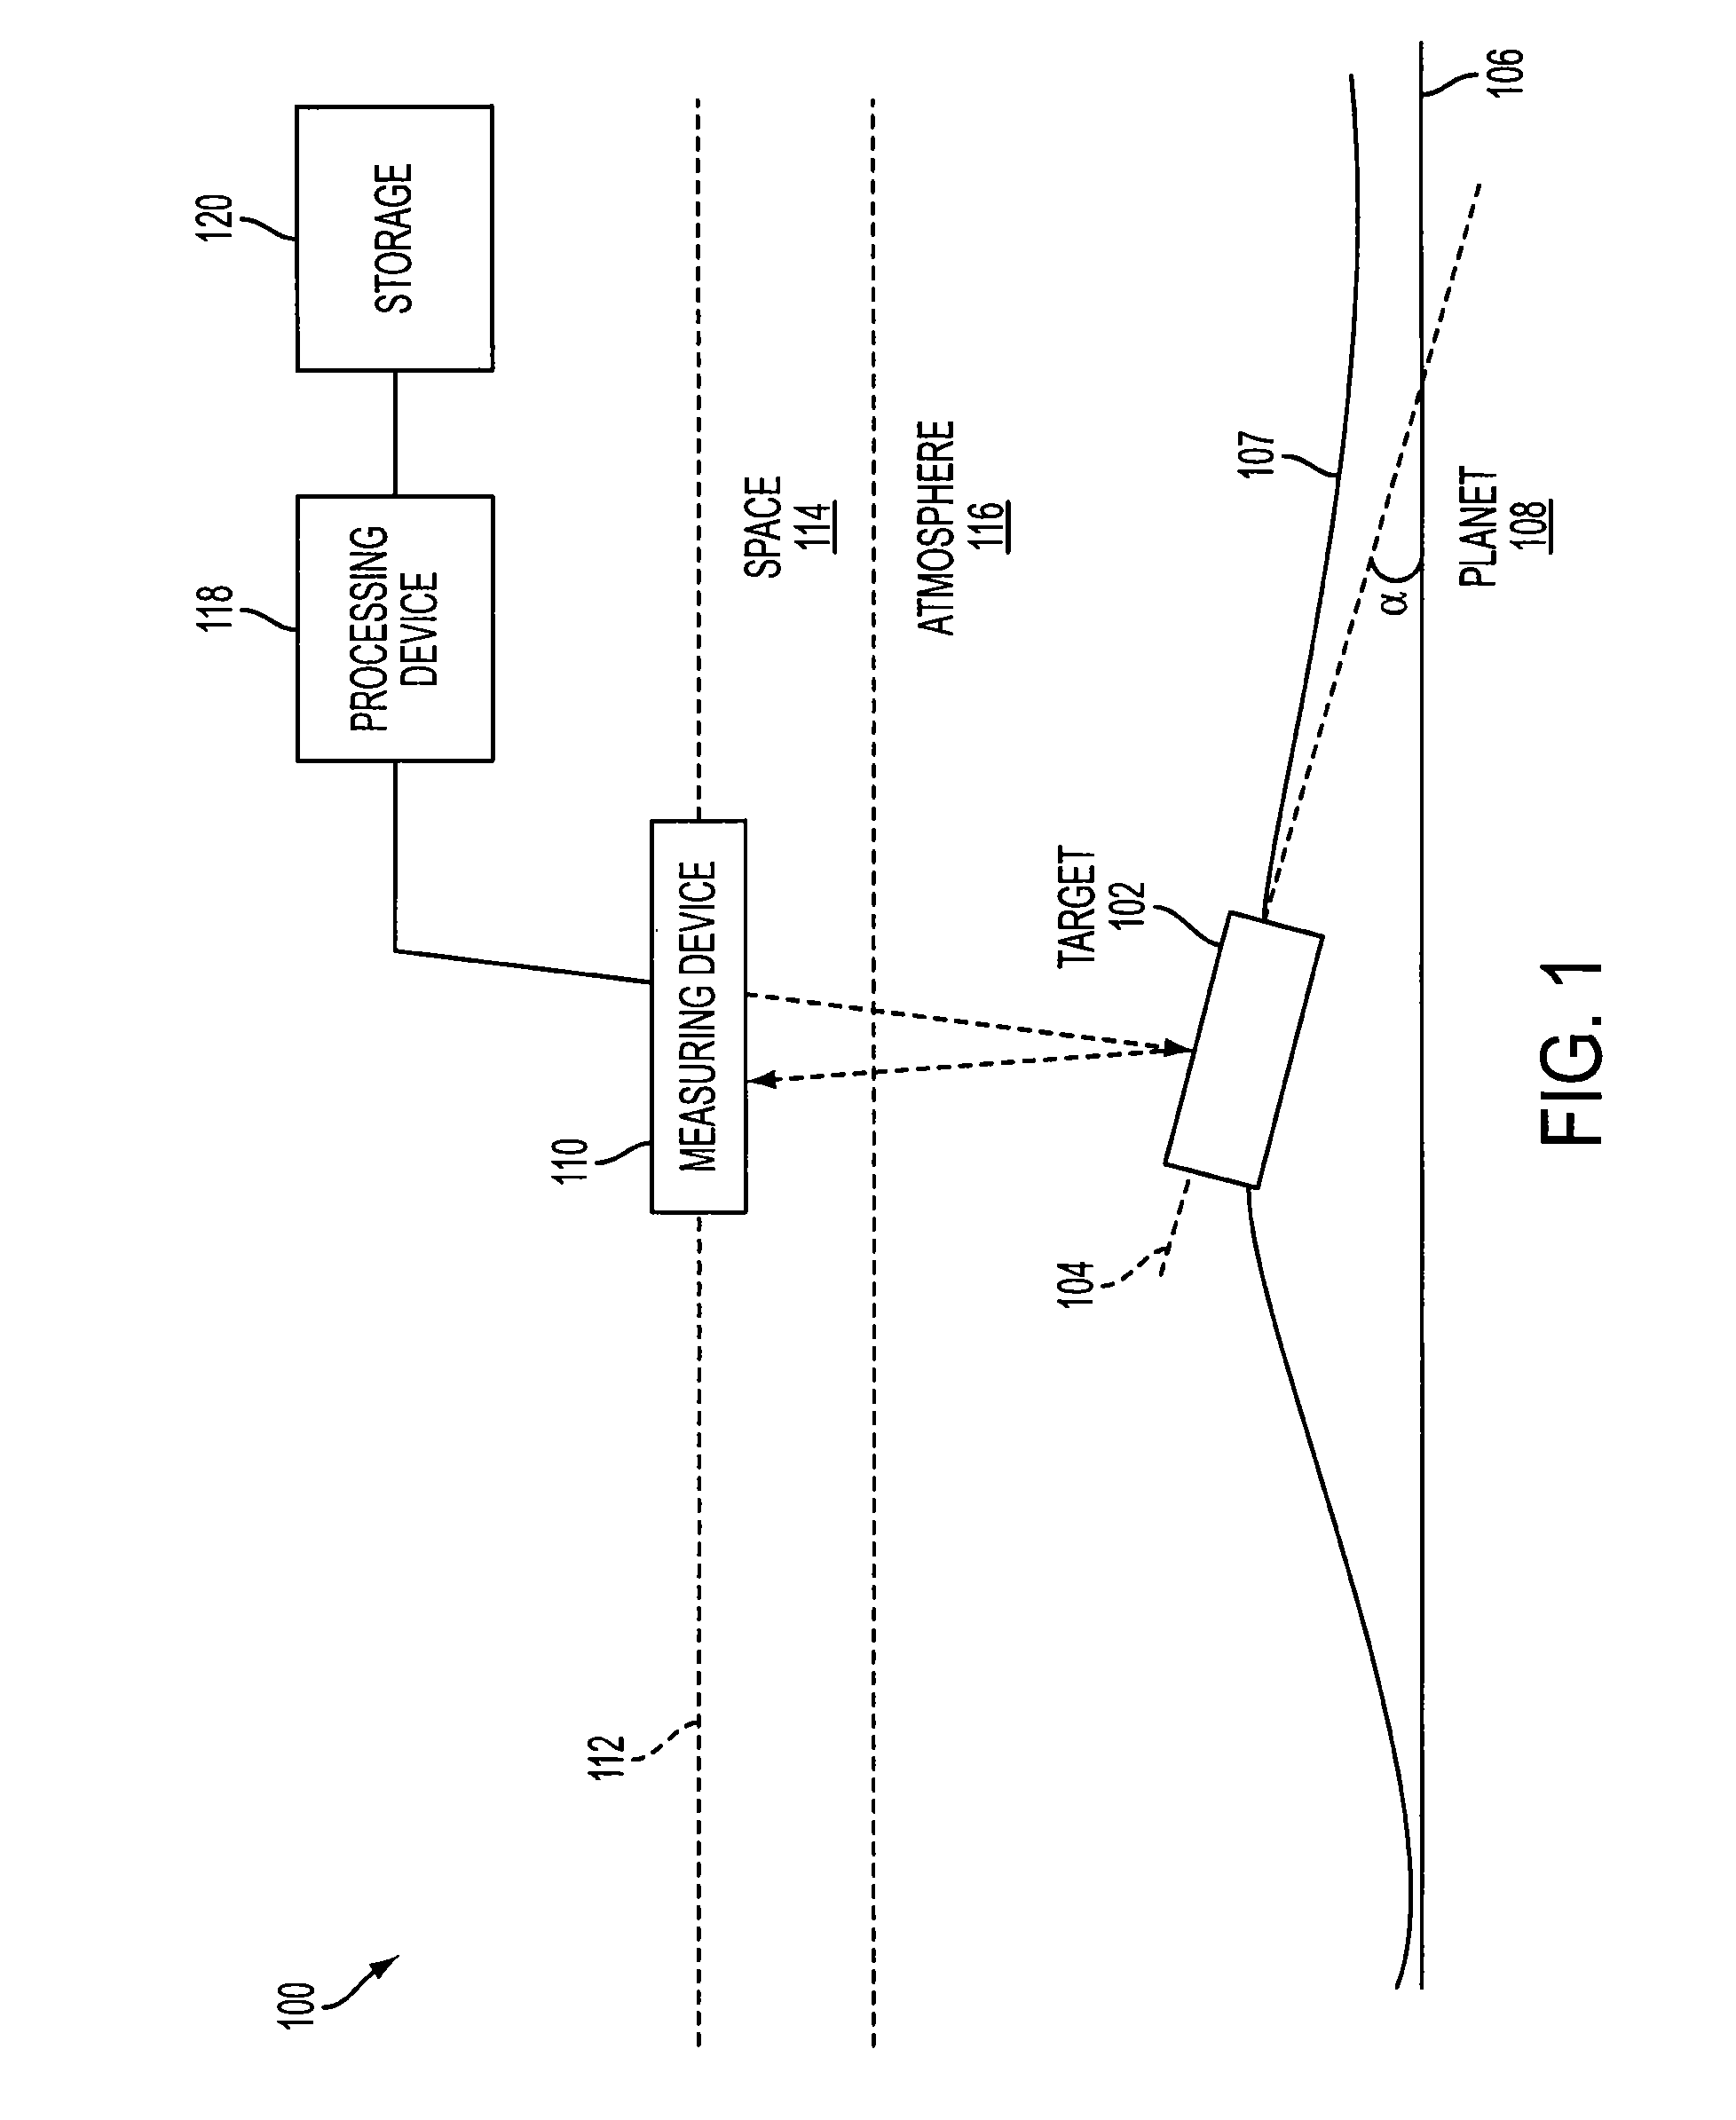 System and method for locating targets using measurements from a space based radar